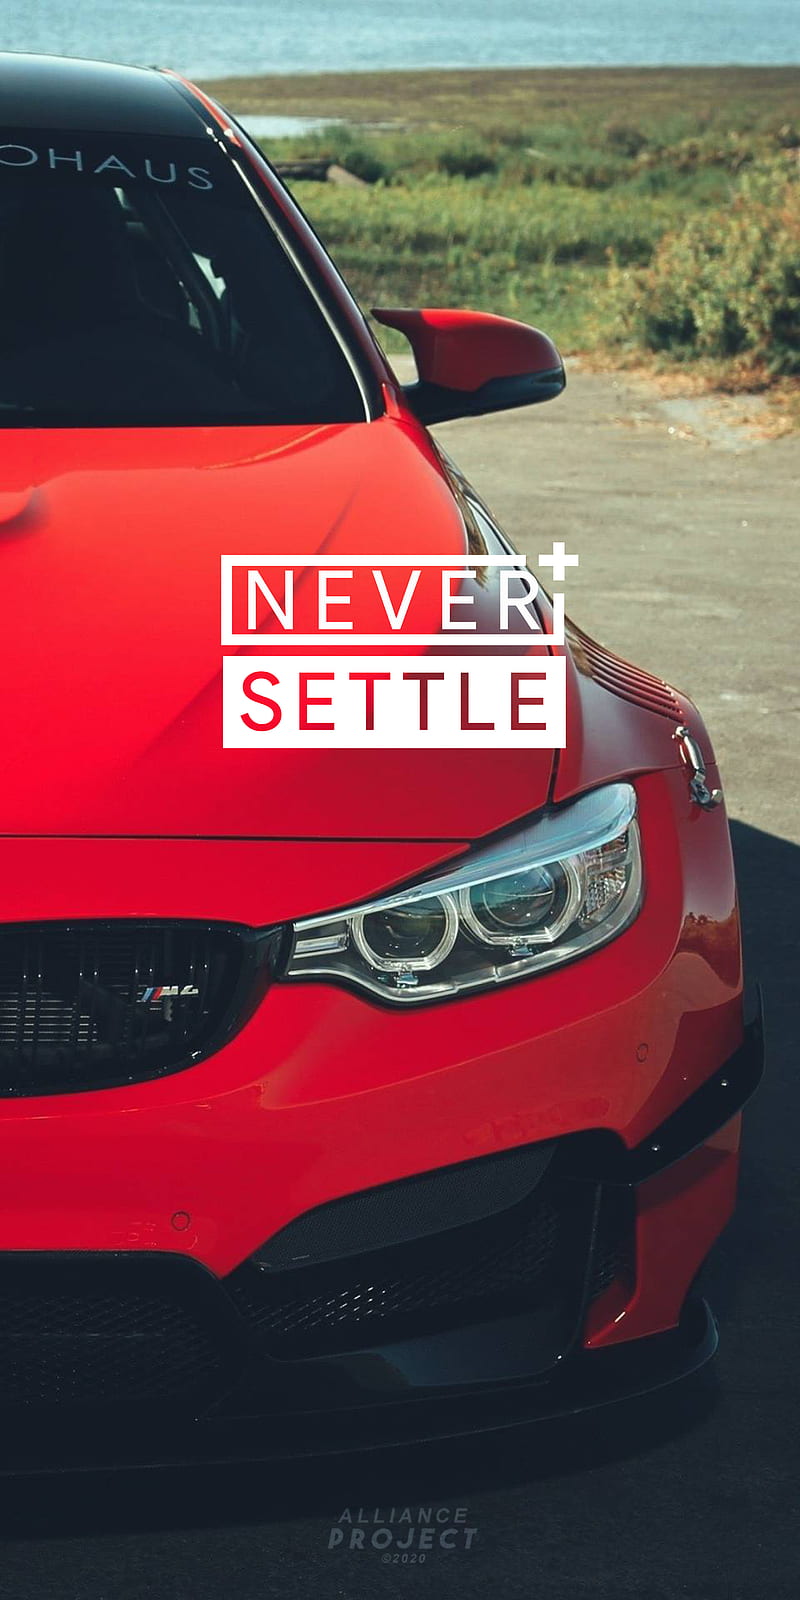 NEVER SETTLE 2, carros, civic, iphonex, never settle, oneplus, red, theme, HD phone wallpaper